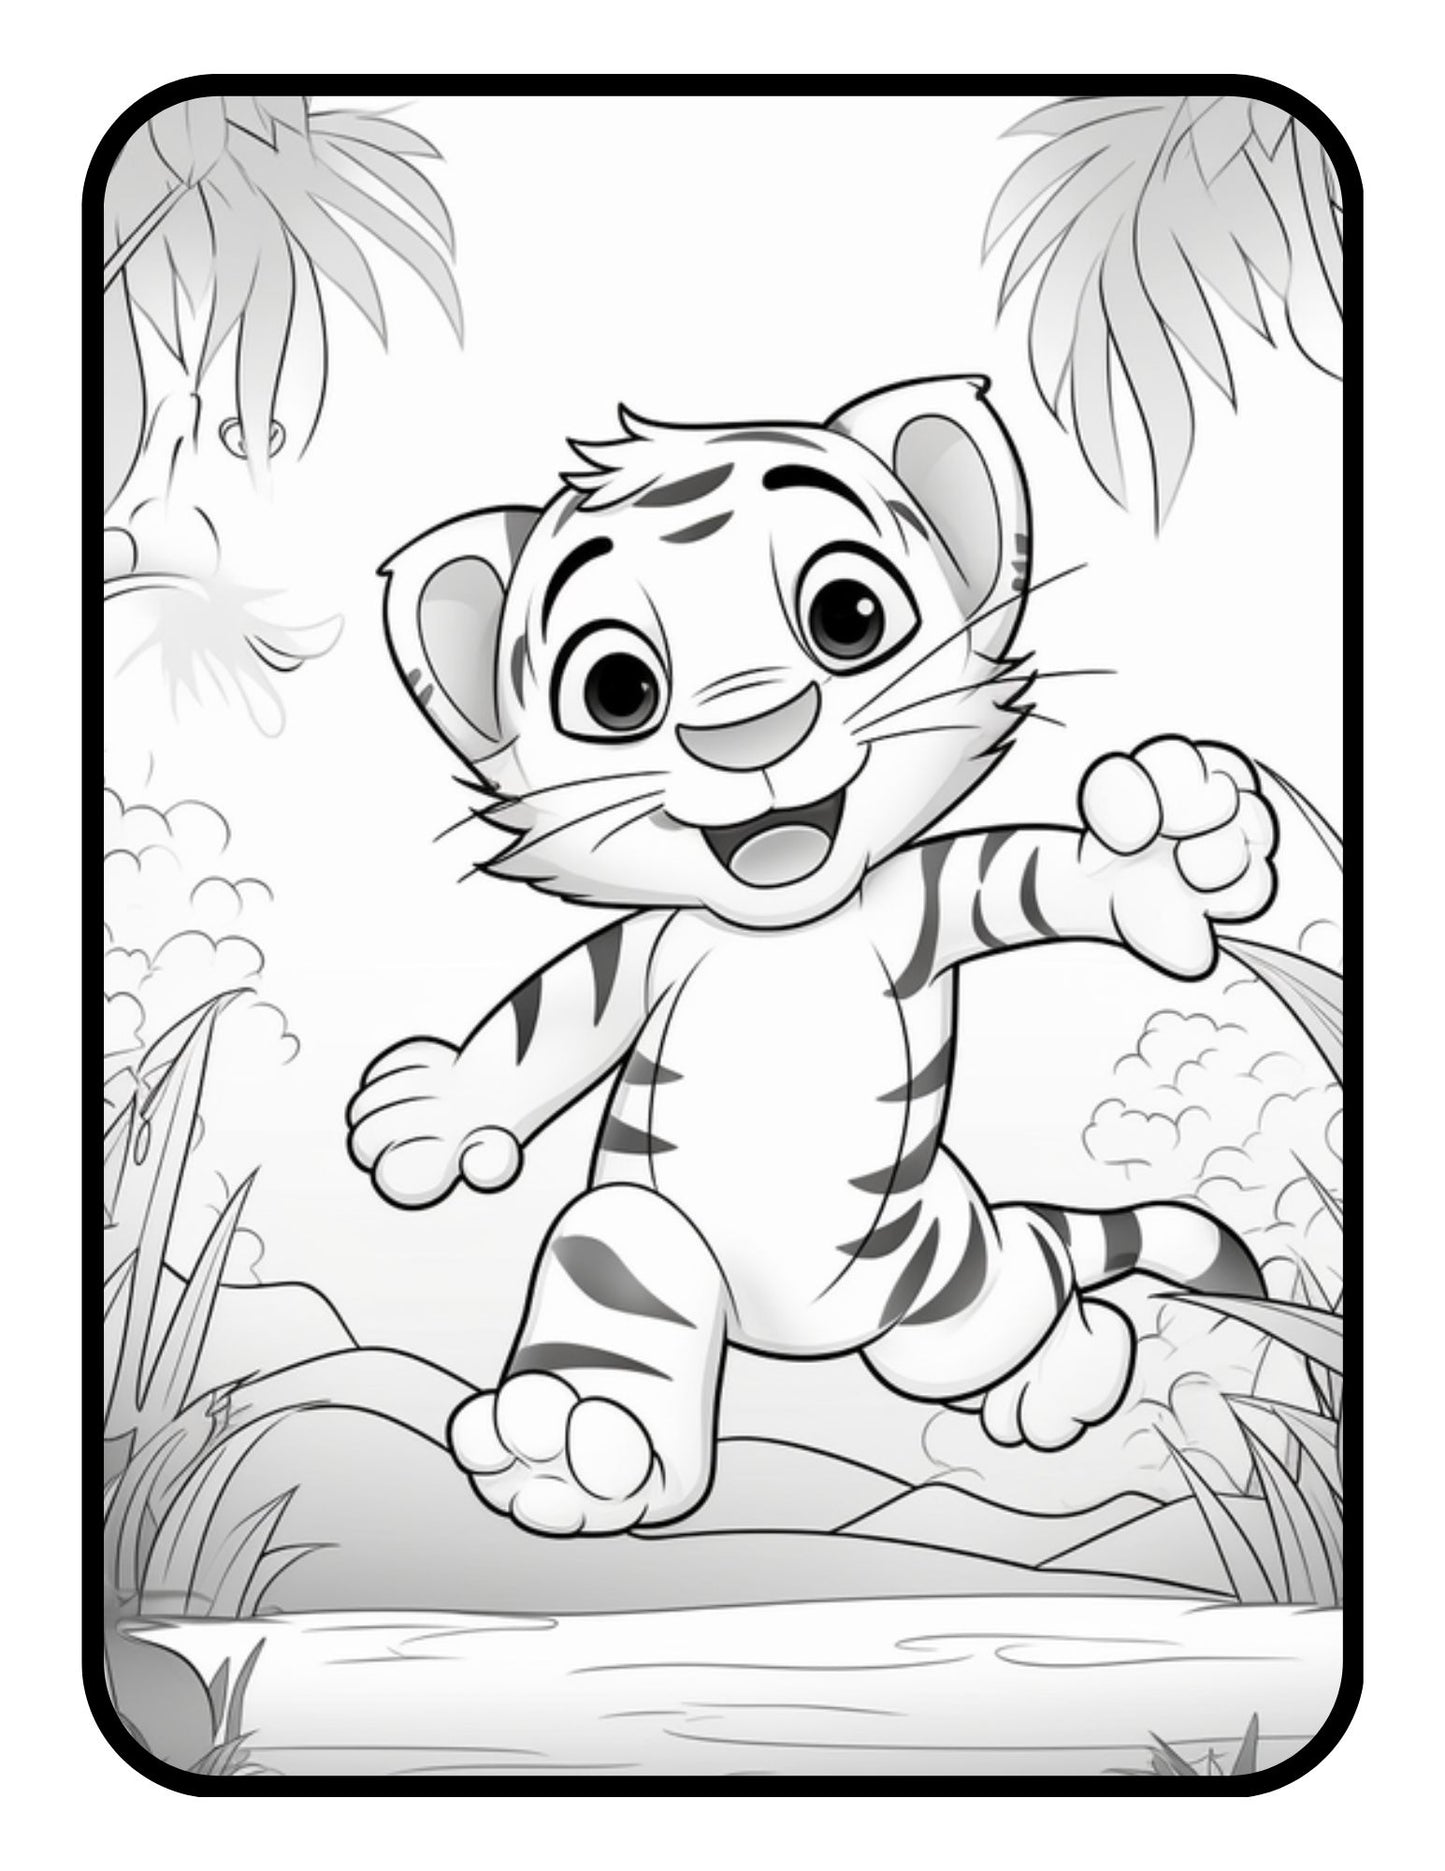 Baby Tiger Coloring Book 50 Pages Wildlife Coloring Book For Adults Mothers Day Gifts Coloring Book Gifts Students Cute Animal Coloring Book